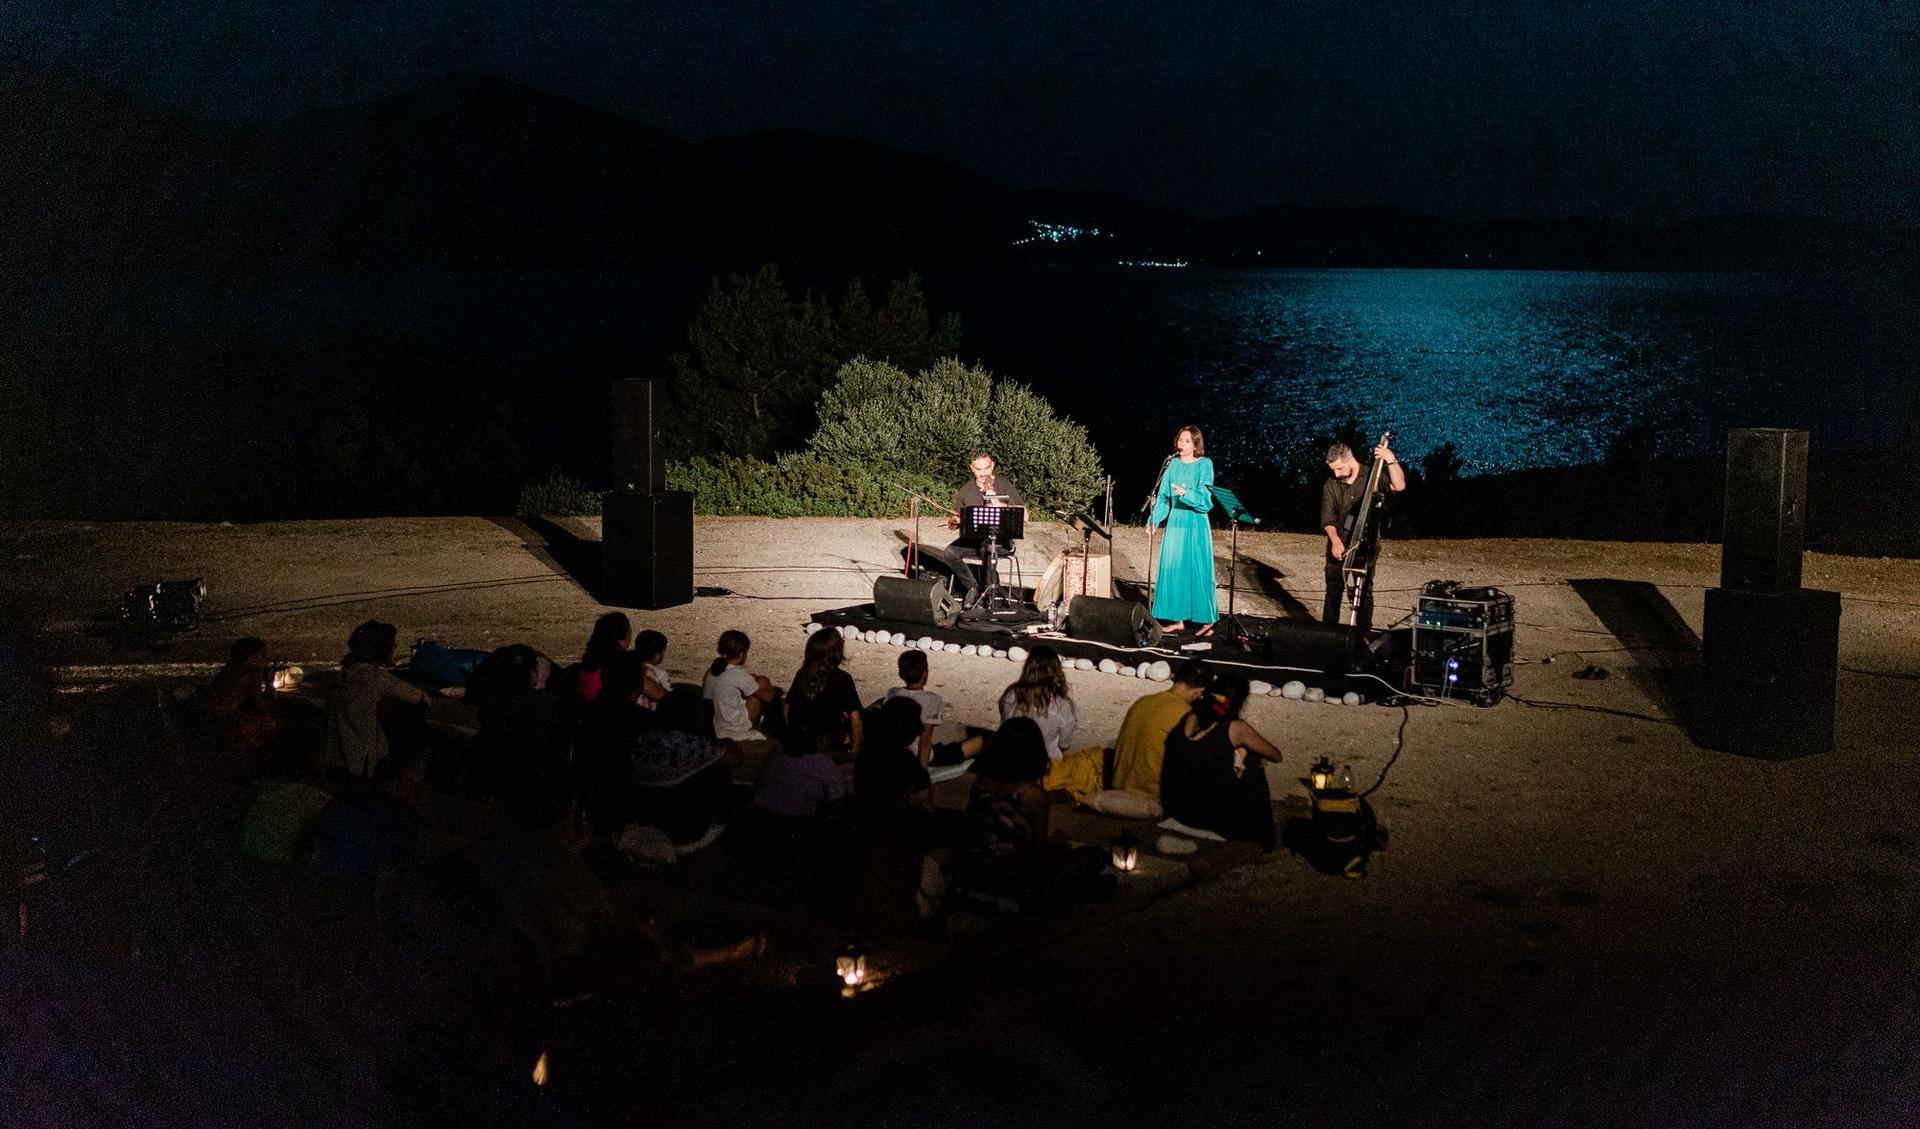 A small music performance: a women is singing and she is accomapnied by two musicians. In the background the sea.